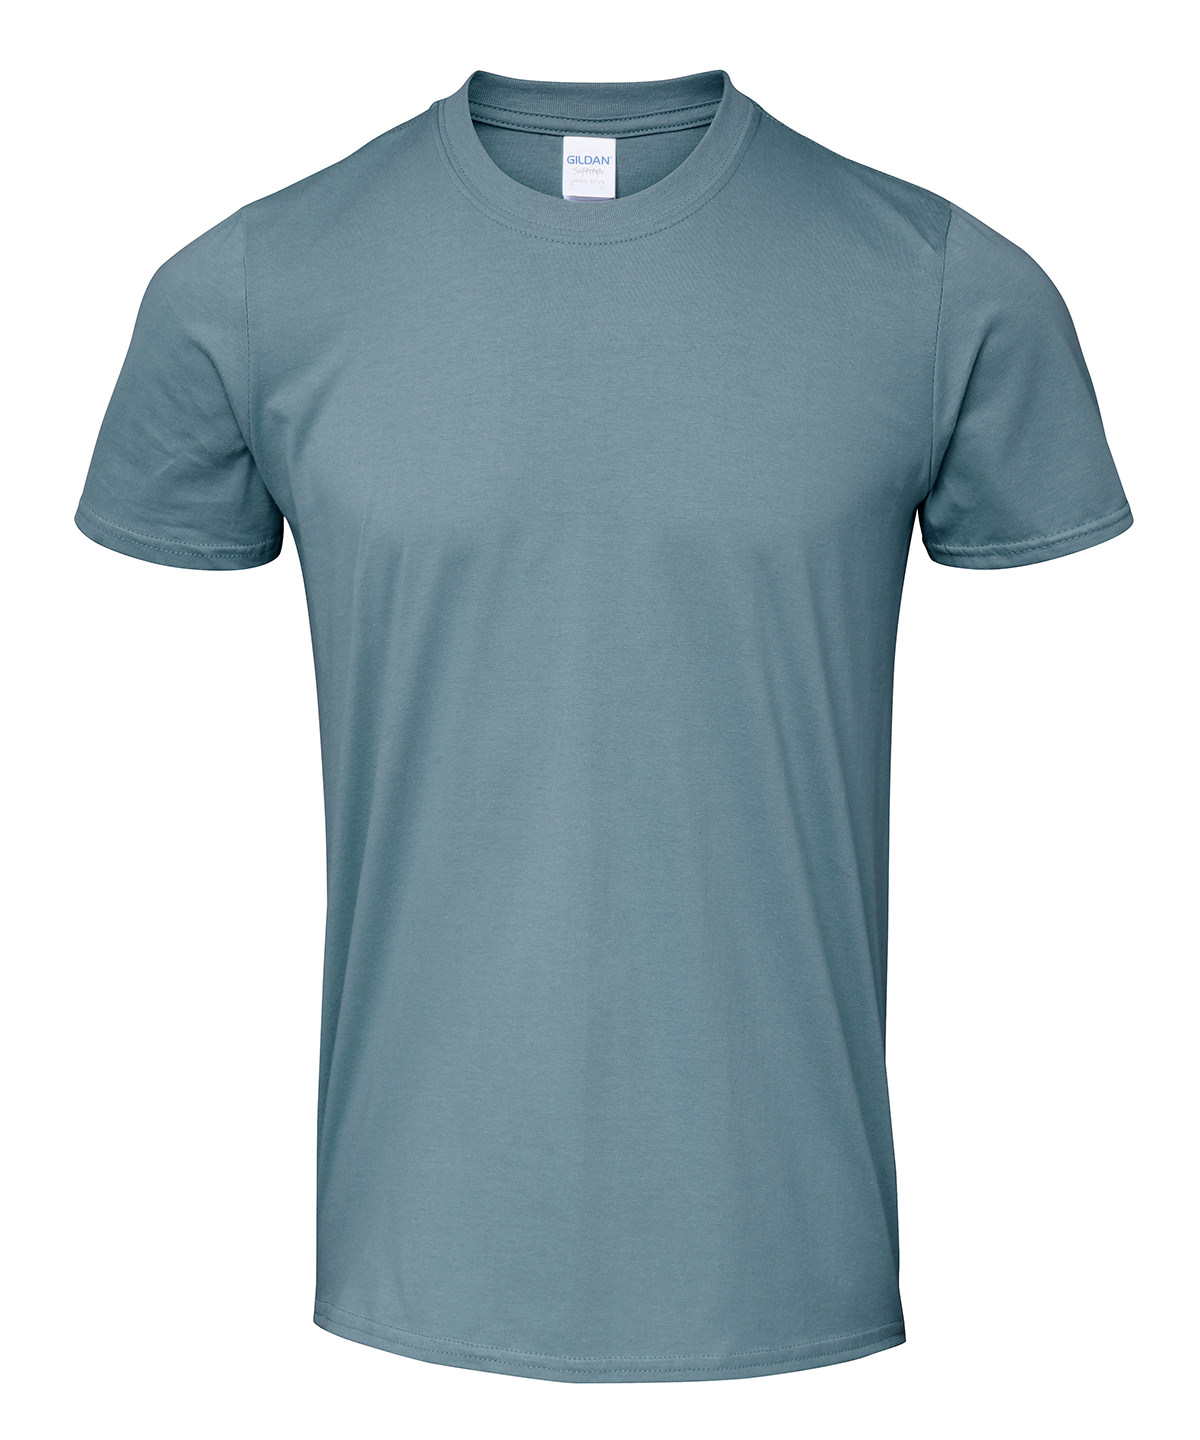 GD001 Softstyle™ adult ringspun t-shirt